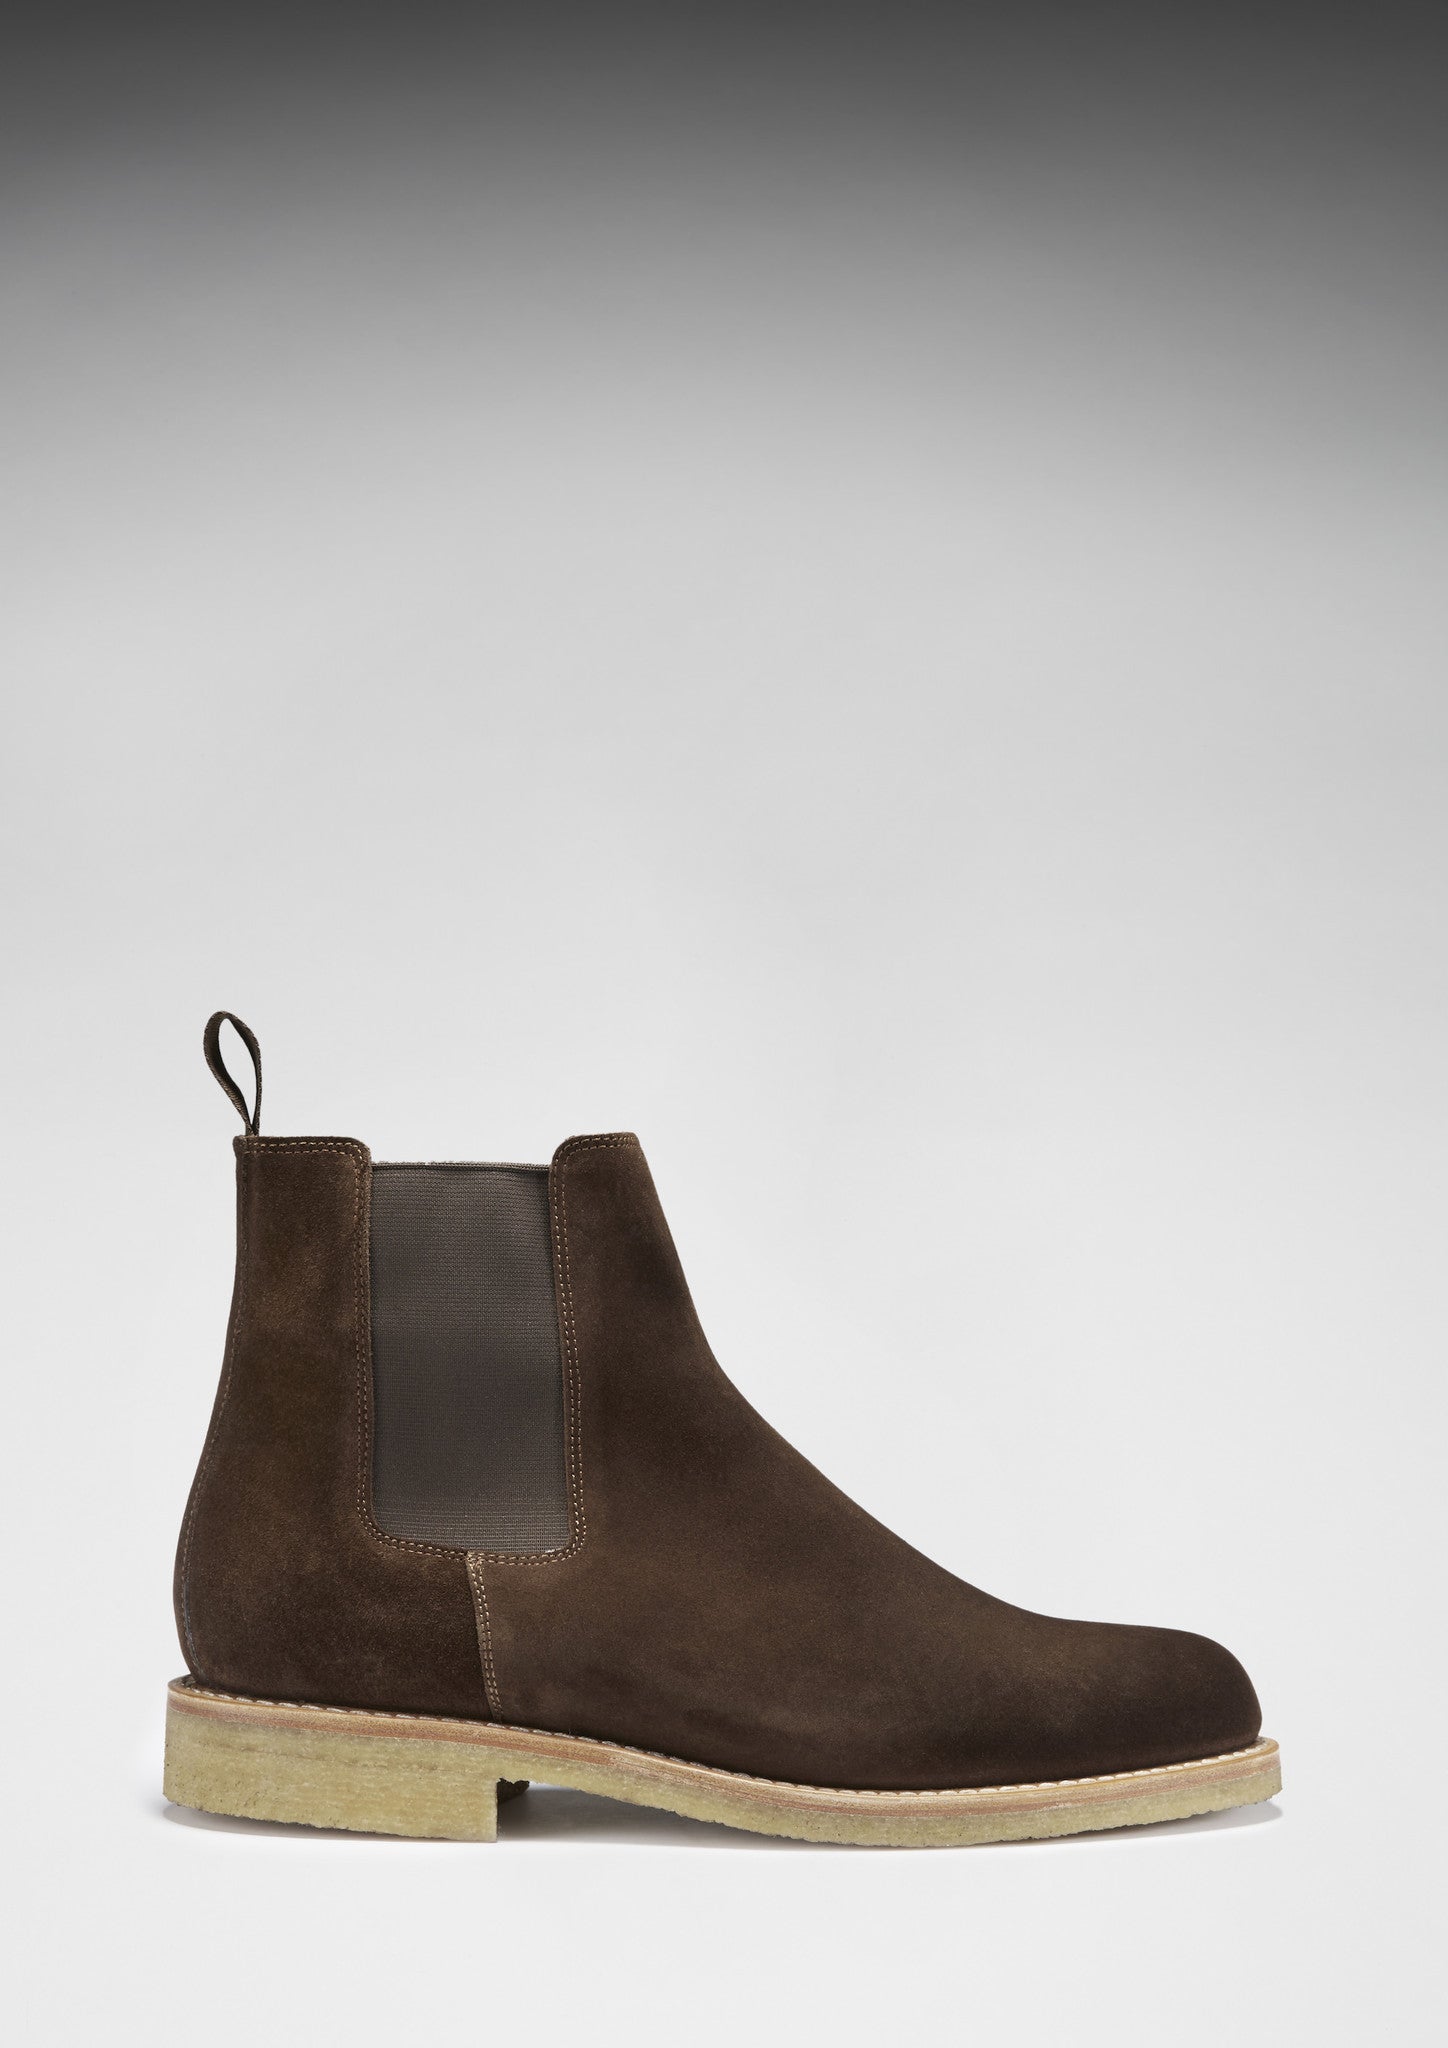 Chelsea Boots Brown Suede Crepe Rubber Sole Side